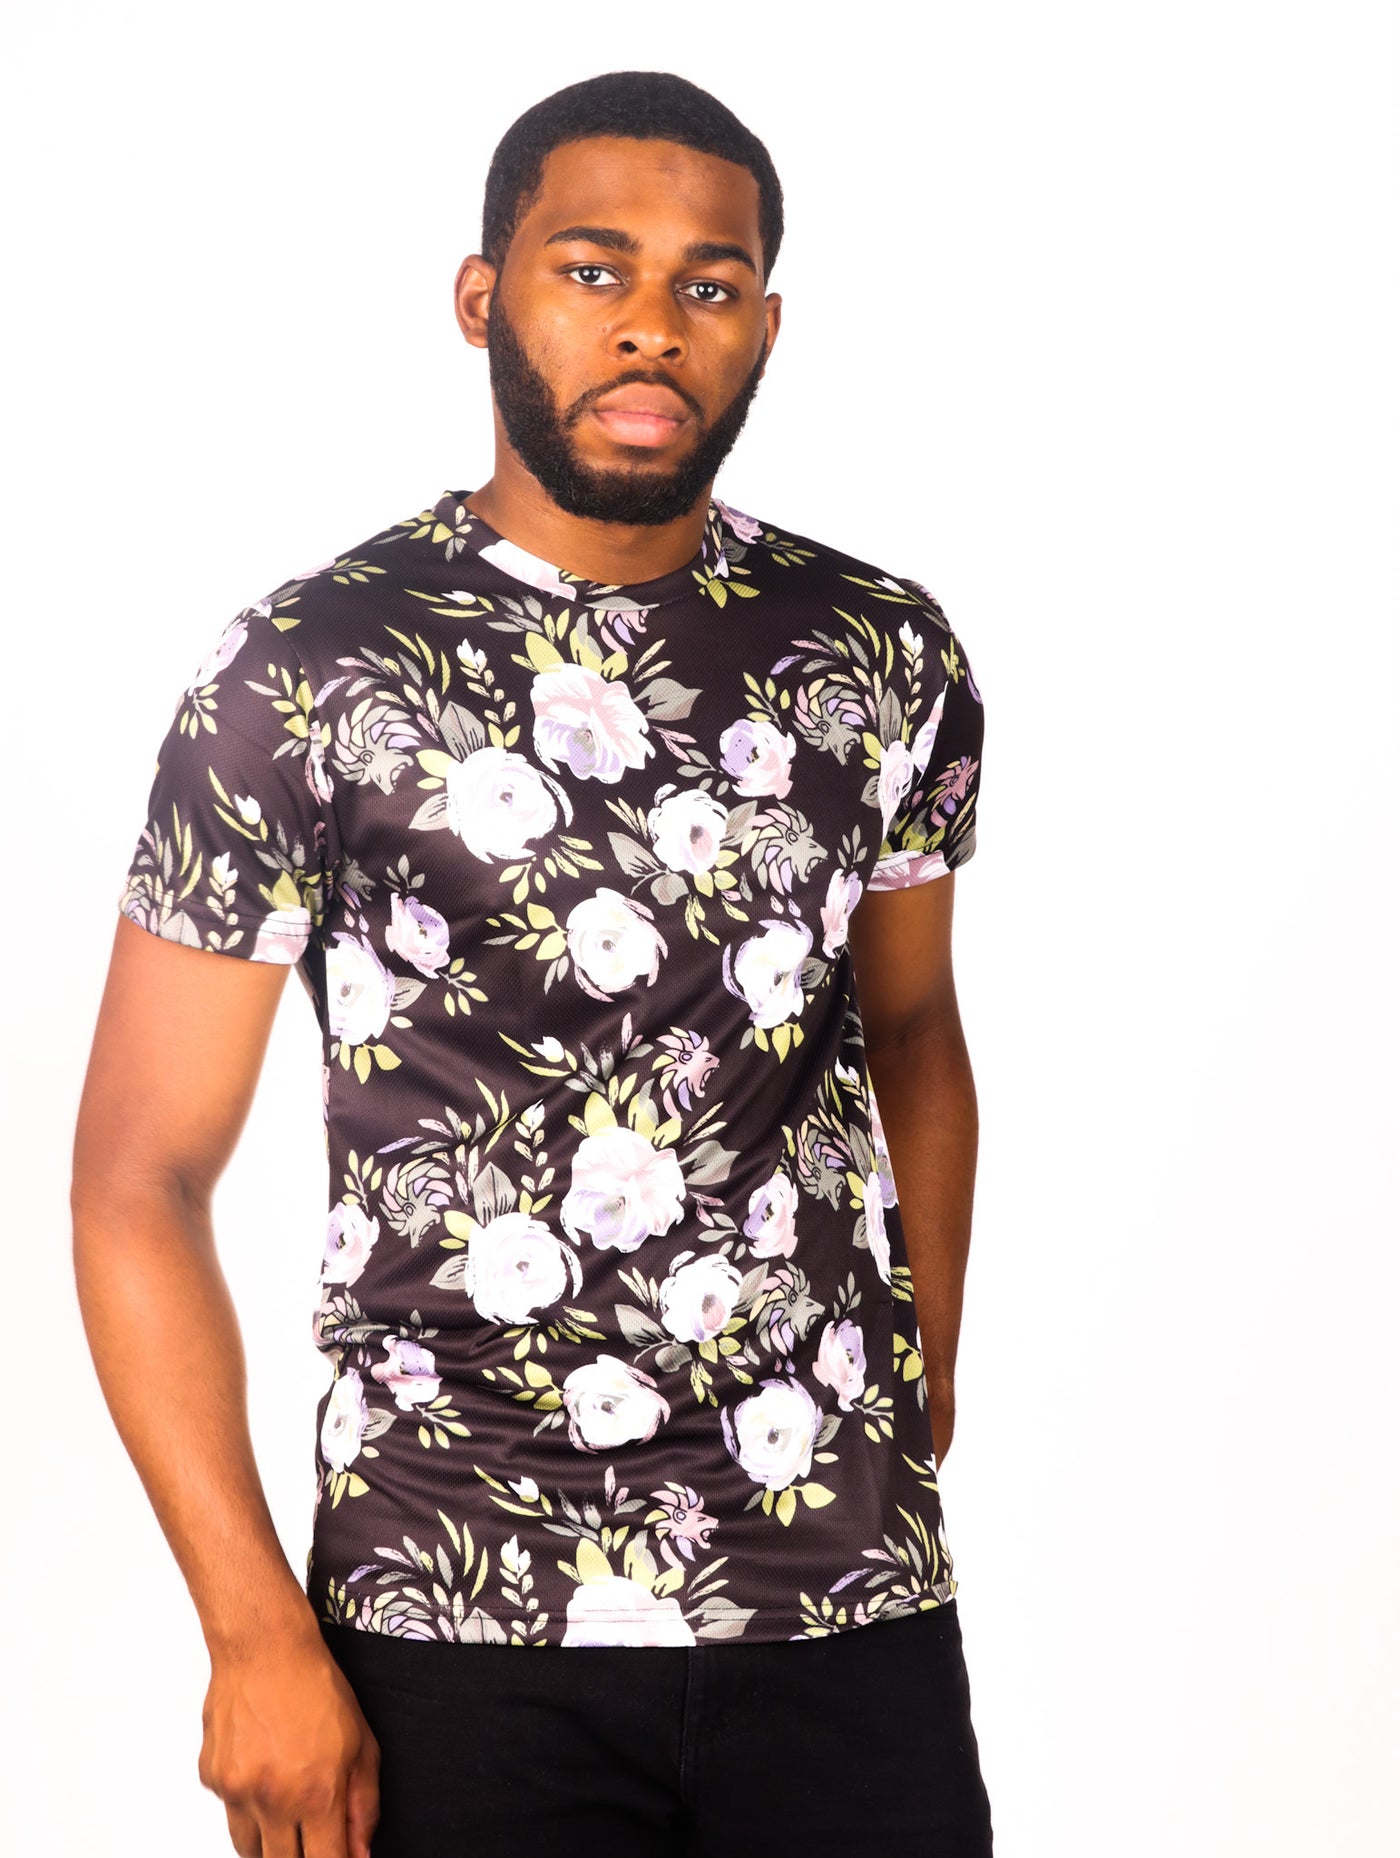 Black and brown Floral T shirt